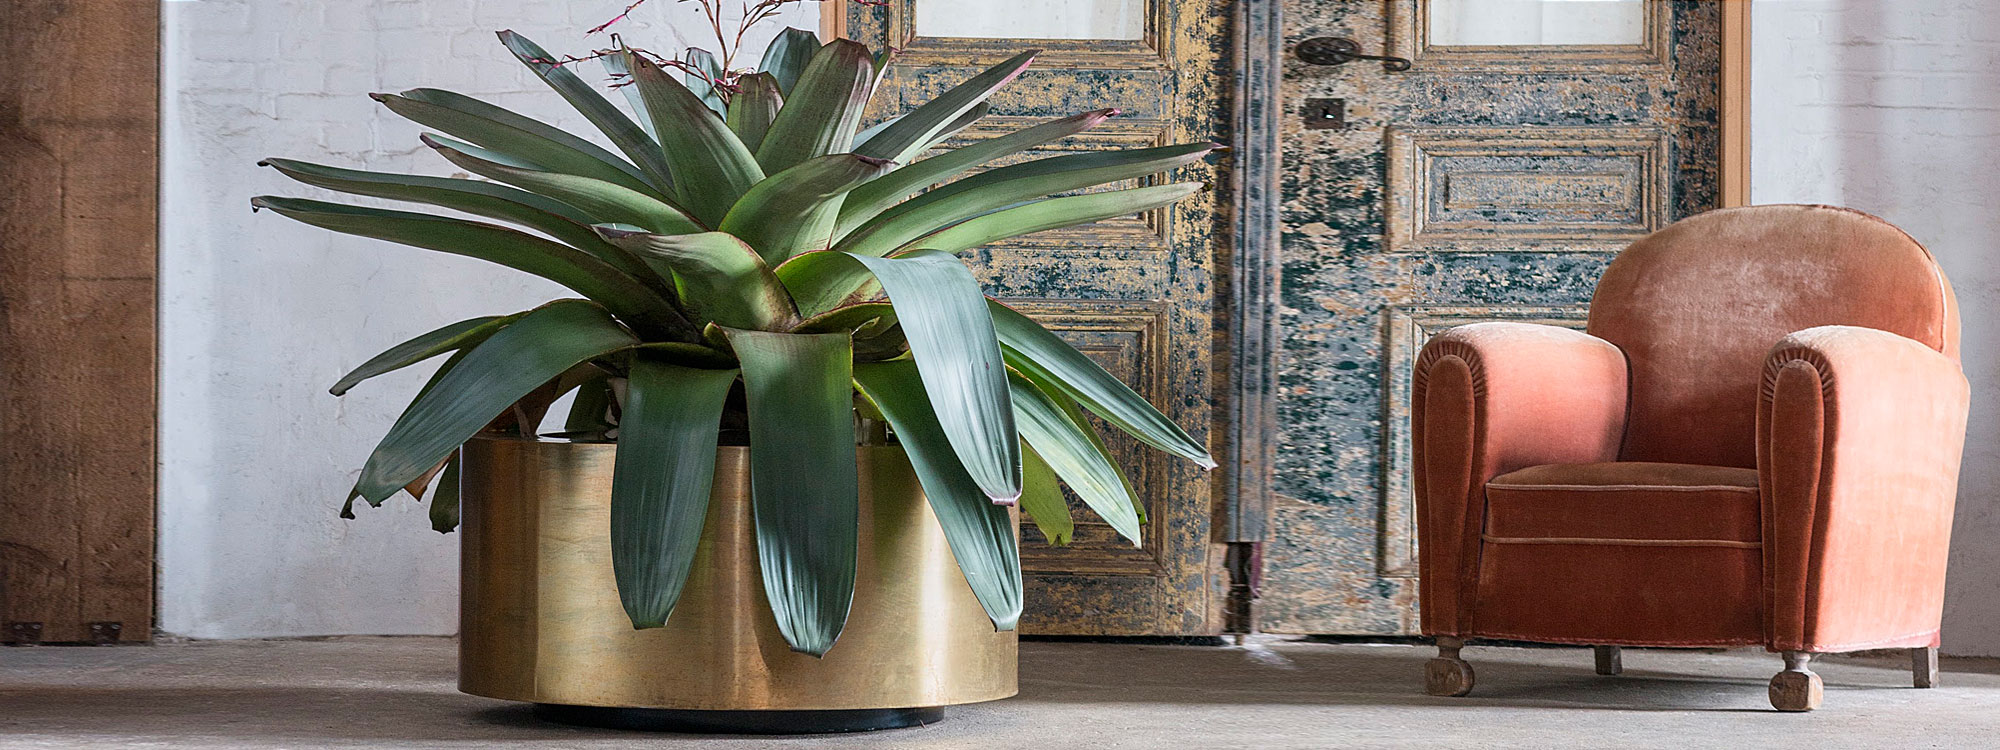 Interior image of large circular brass planter with polished golden finish, by Cuprum